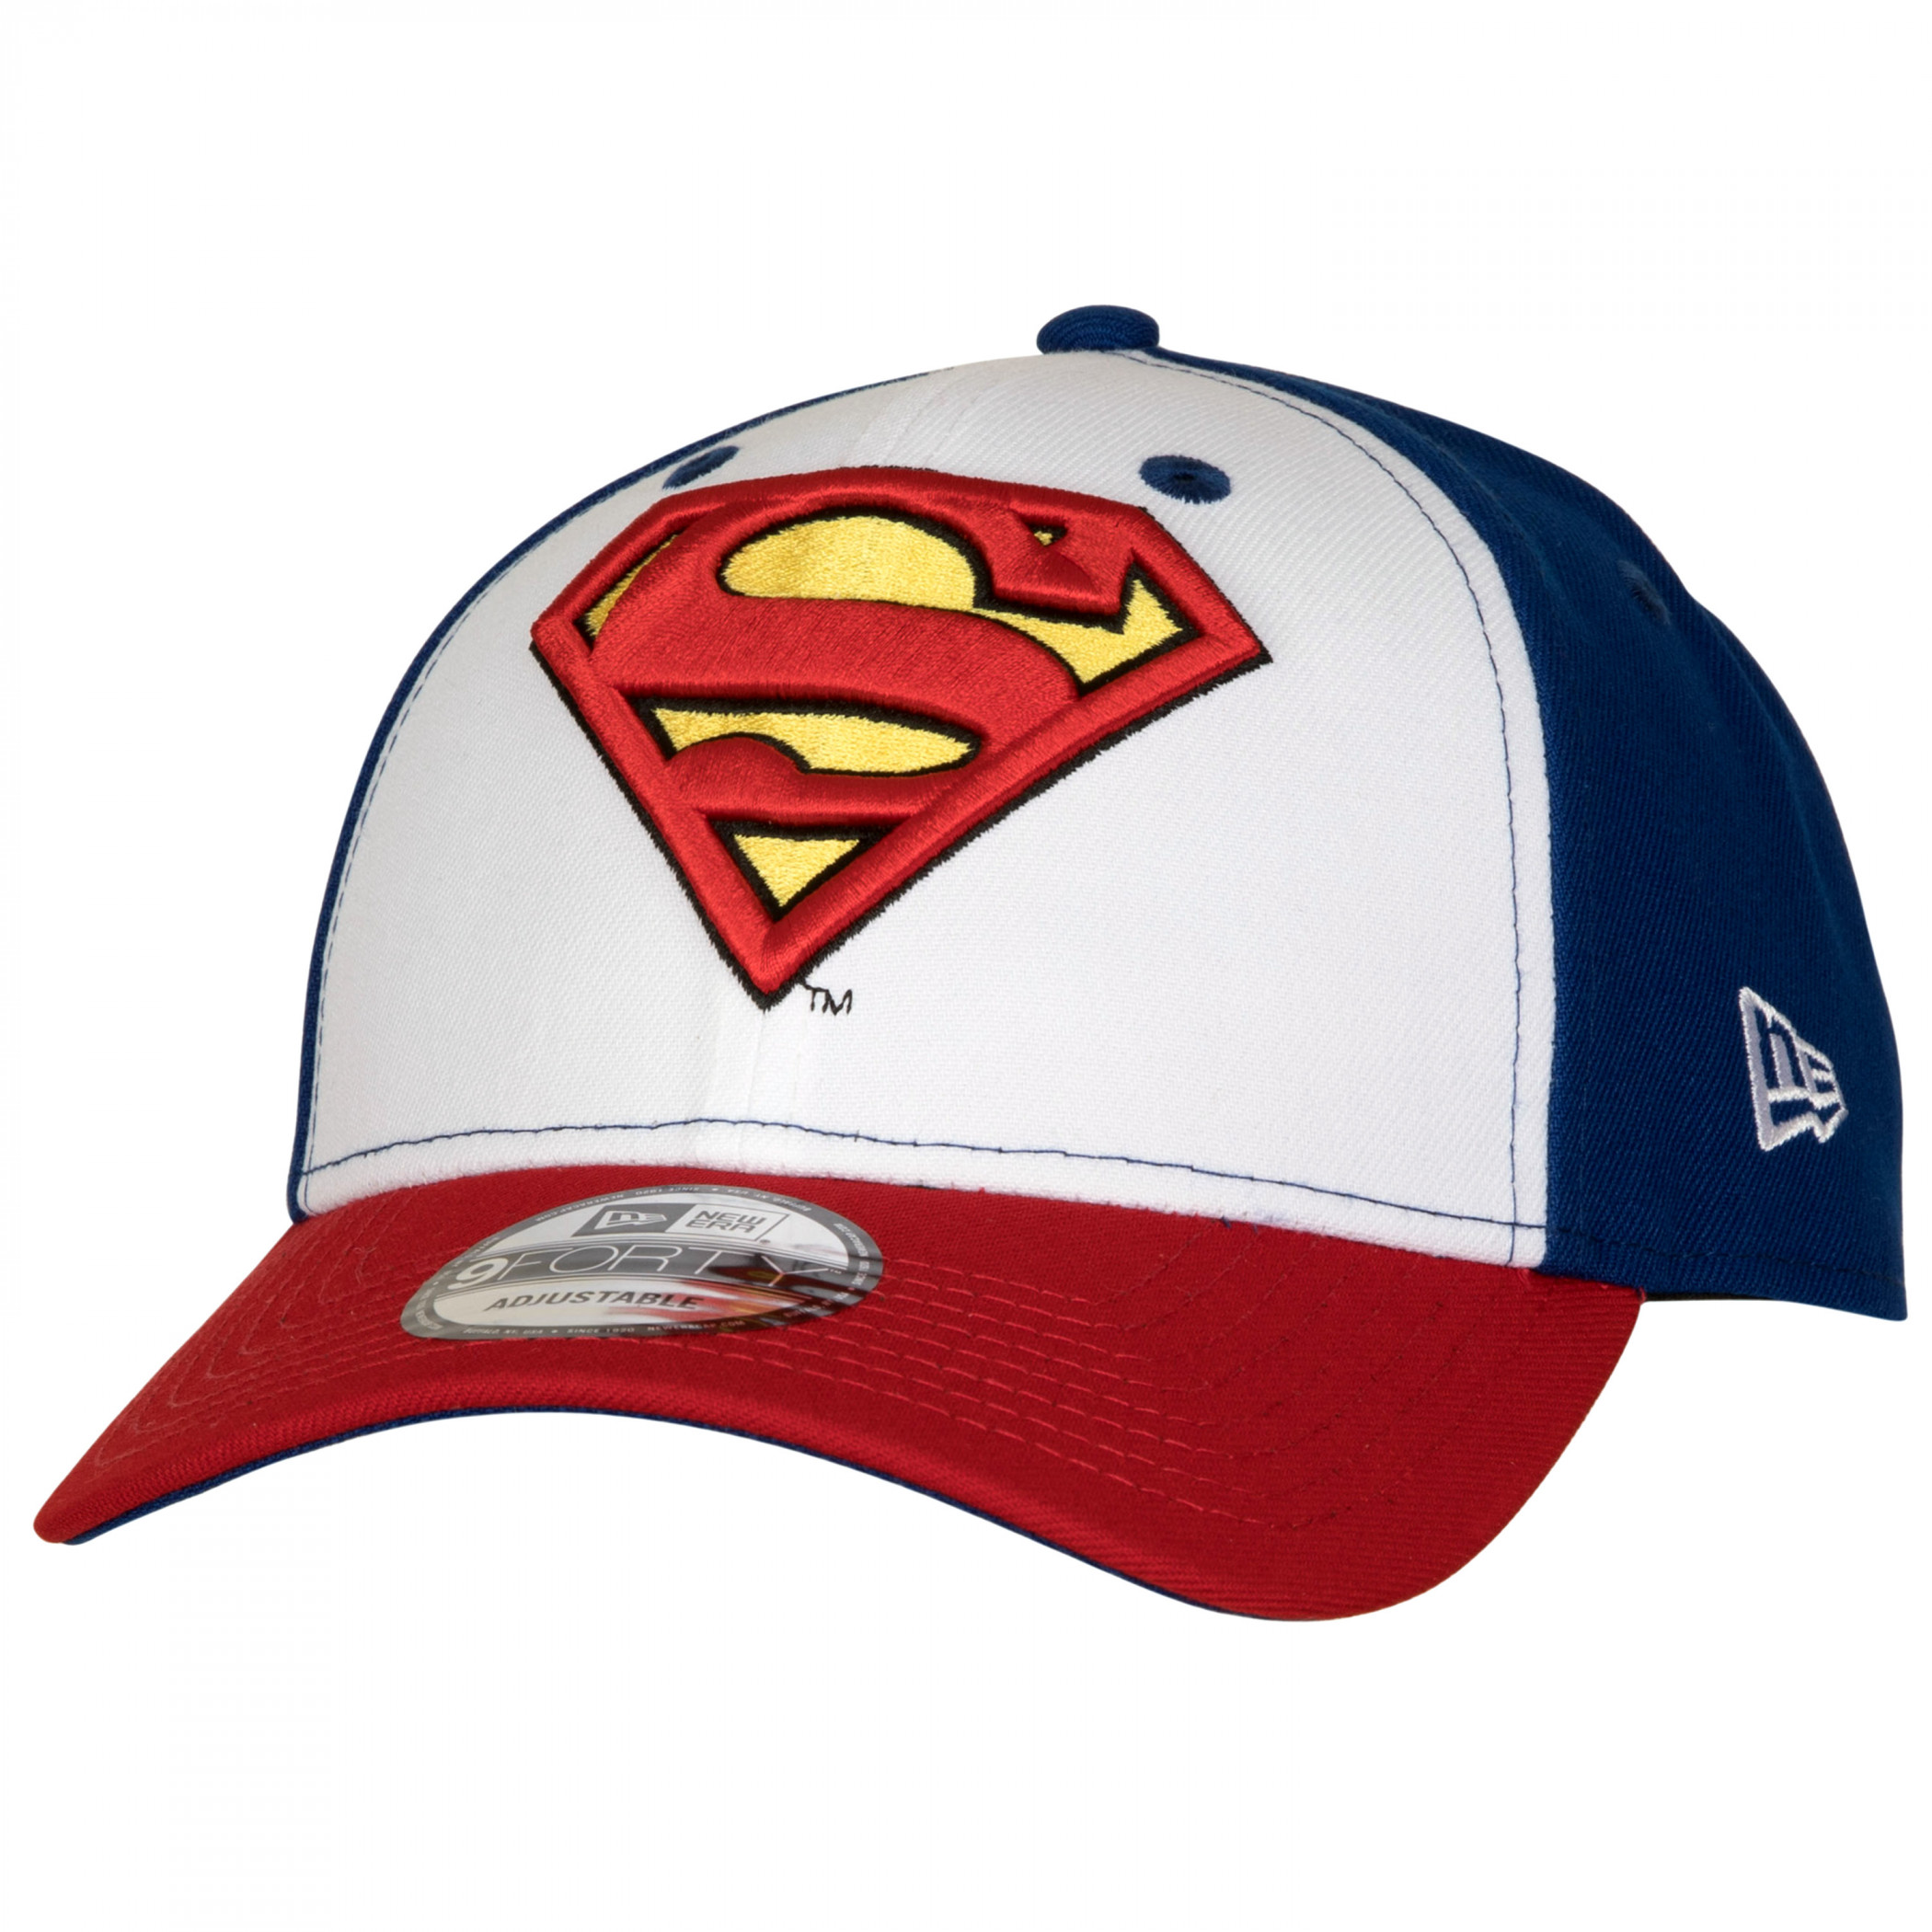 Superman Logo Red White and Blue New Era 9Forty Adjustable Hat